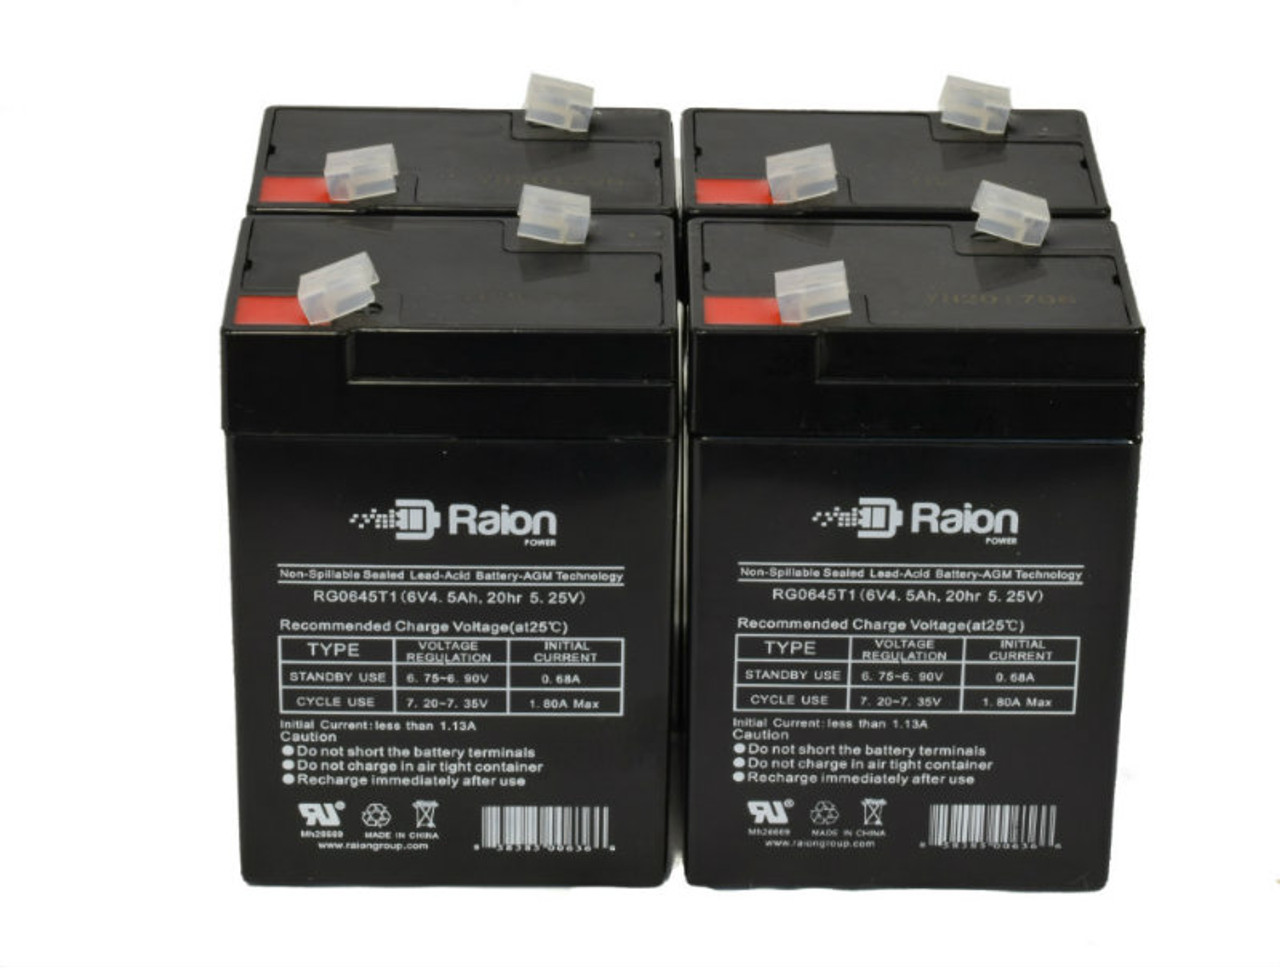 Raion Power 6V 4.5Ah Replacement Emergency Light Battery for Lithonia 6ELM2 - 4 Pack